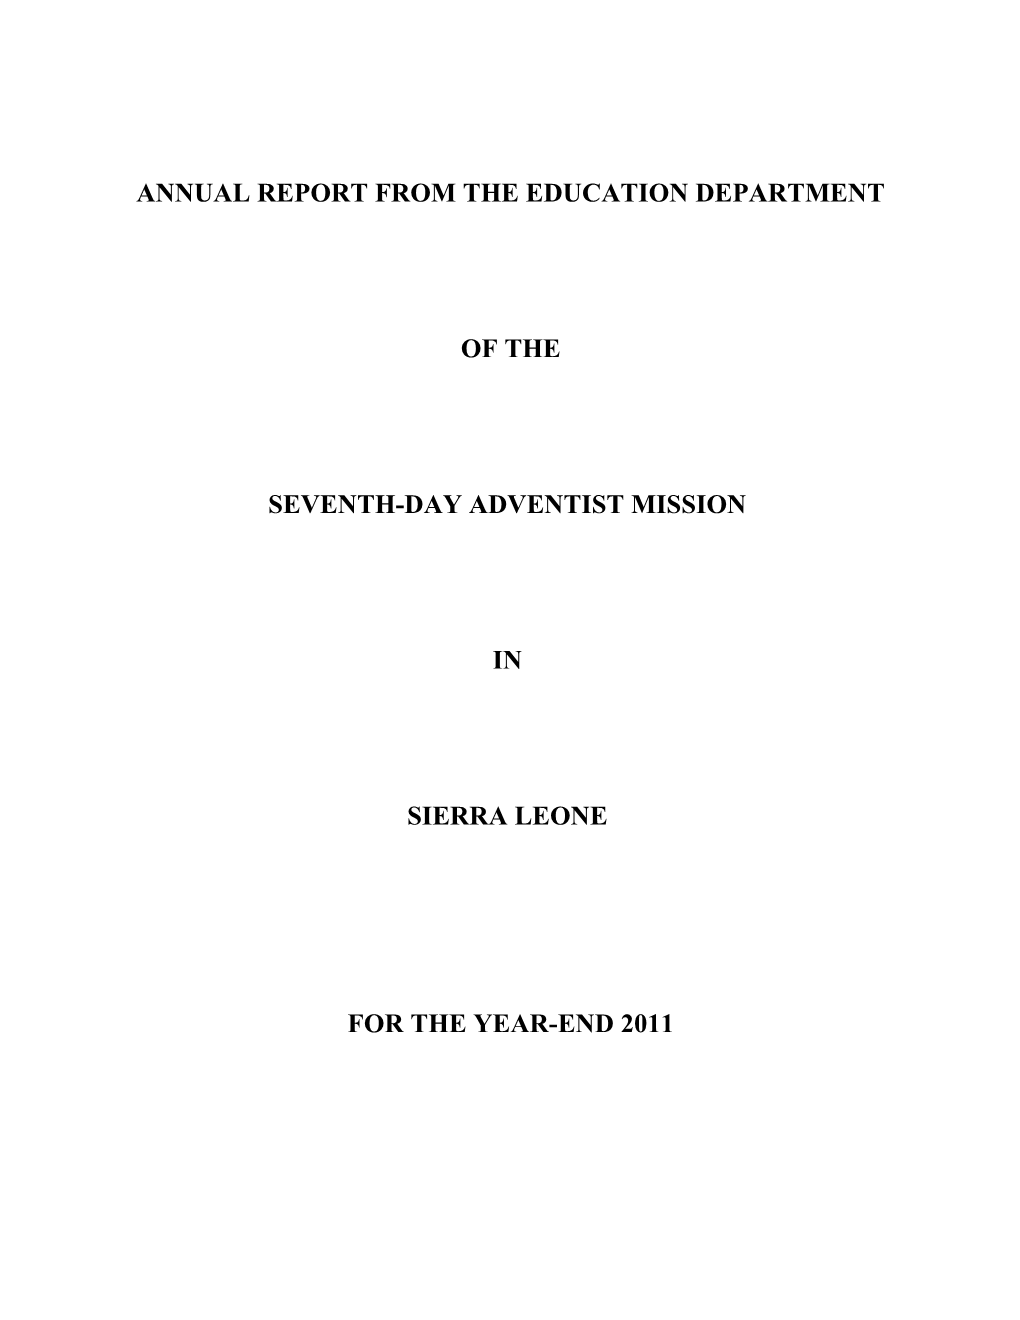 Annual Report from the Education Department